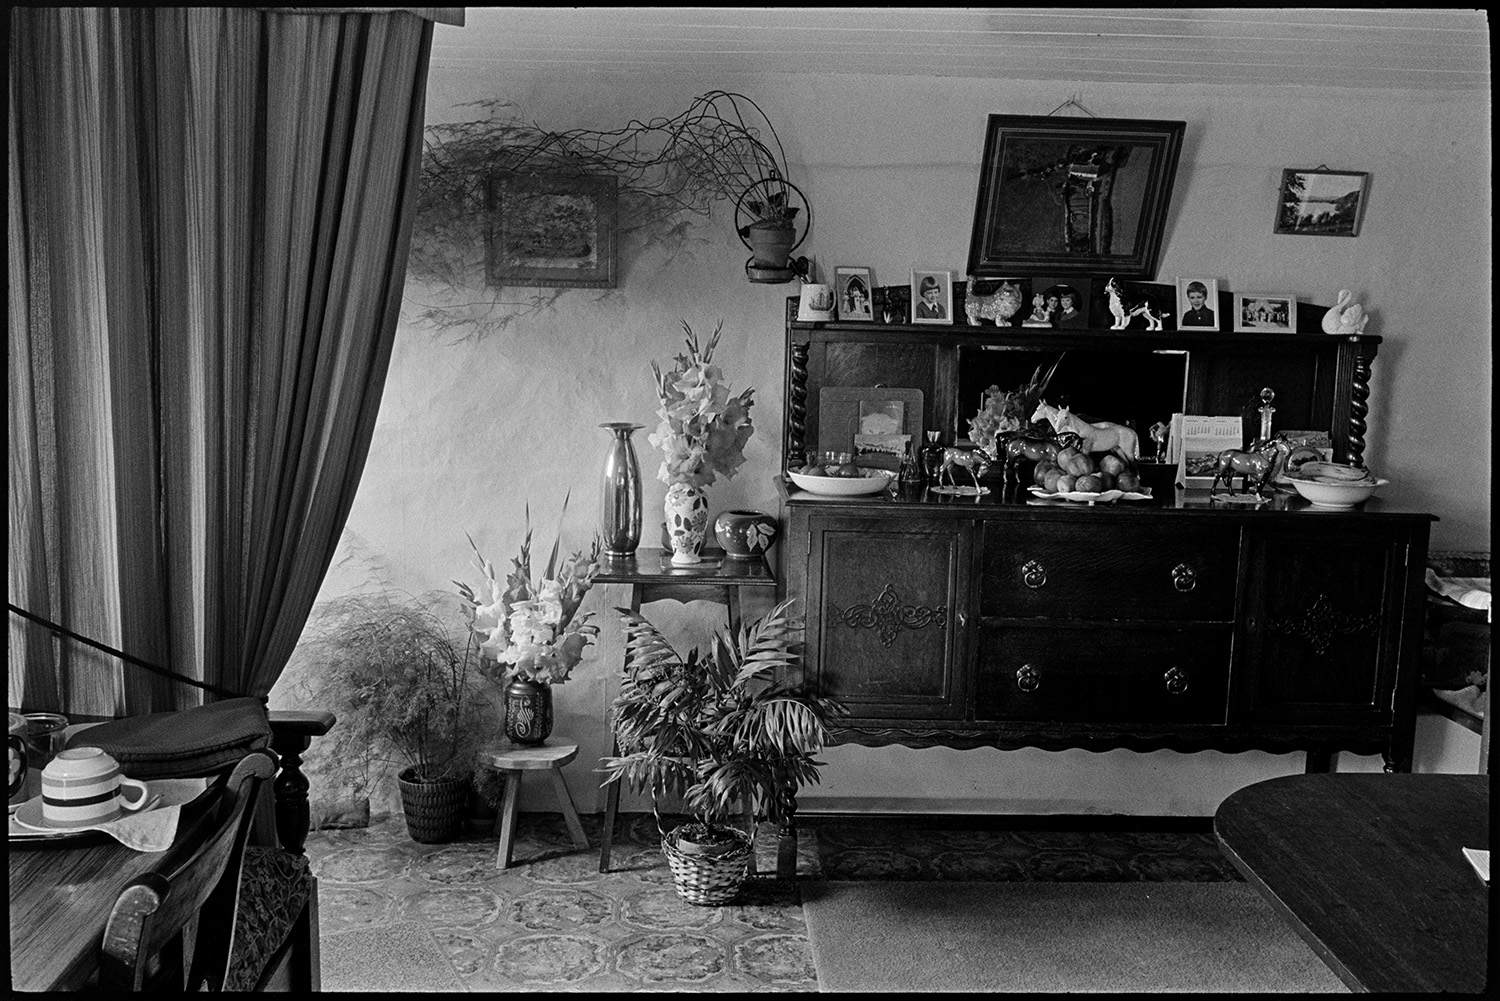 Cottage interior. Man and woman seated by open fire reading, dresser with china, side table.
[The interior of Edith Crocker and Henry Crocker's cottage at Monkokehampton. A large wooden sideboard with china ornaments, fruit bowls and photographs on it is visible. There are pictures on the wall, with pot plants and flowers on display around the sideboard.]